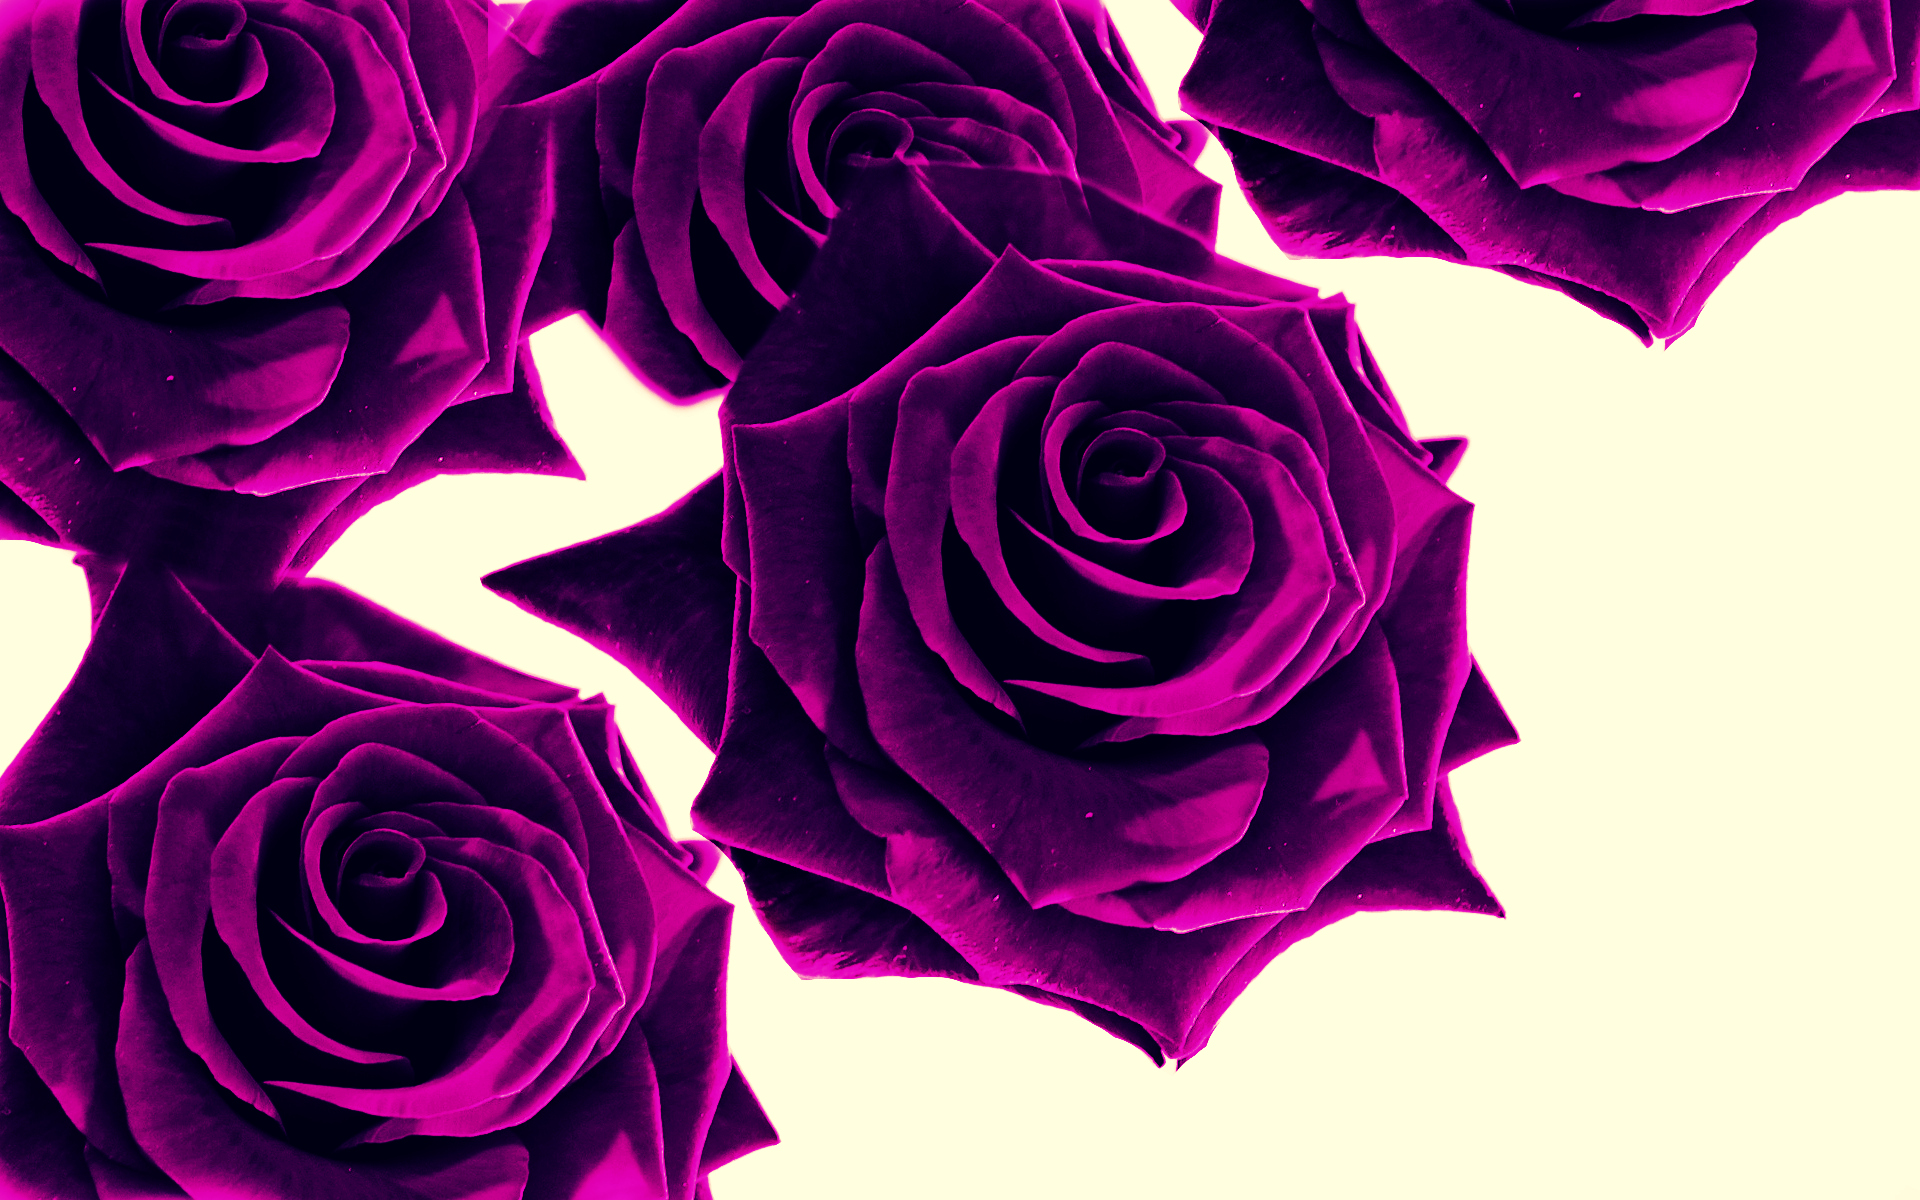 Free download wallpaper roses purple wallpapers 1920x1200 [1920x1200